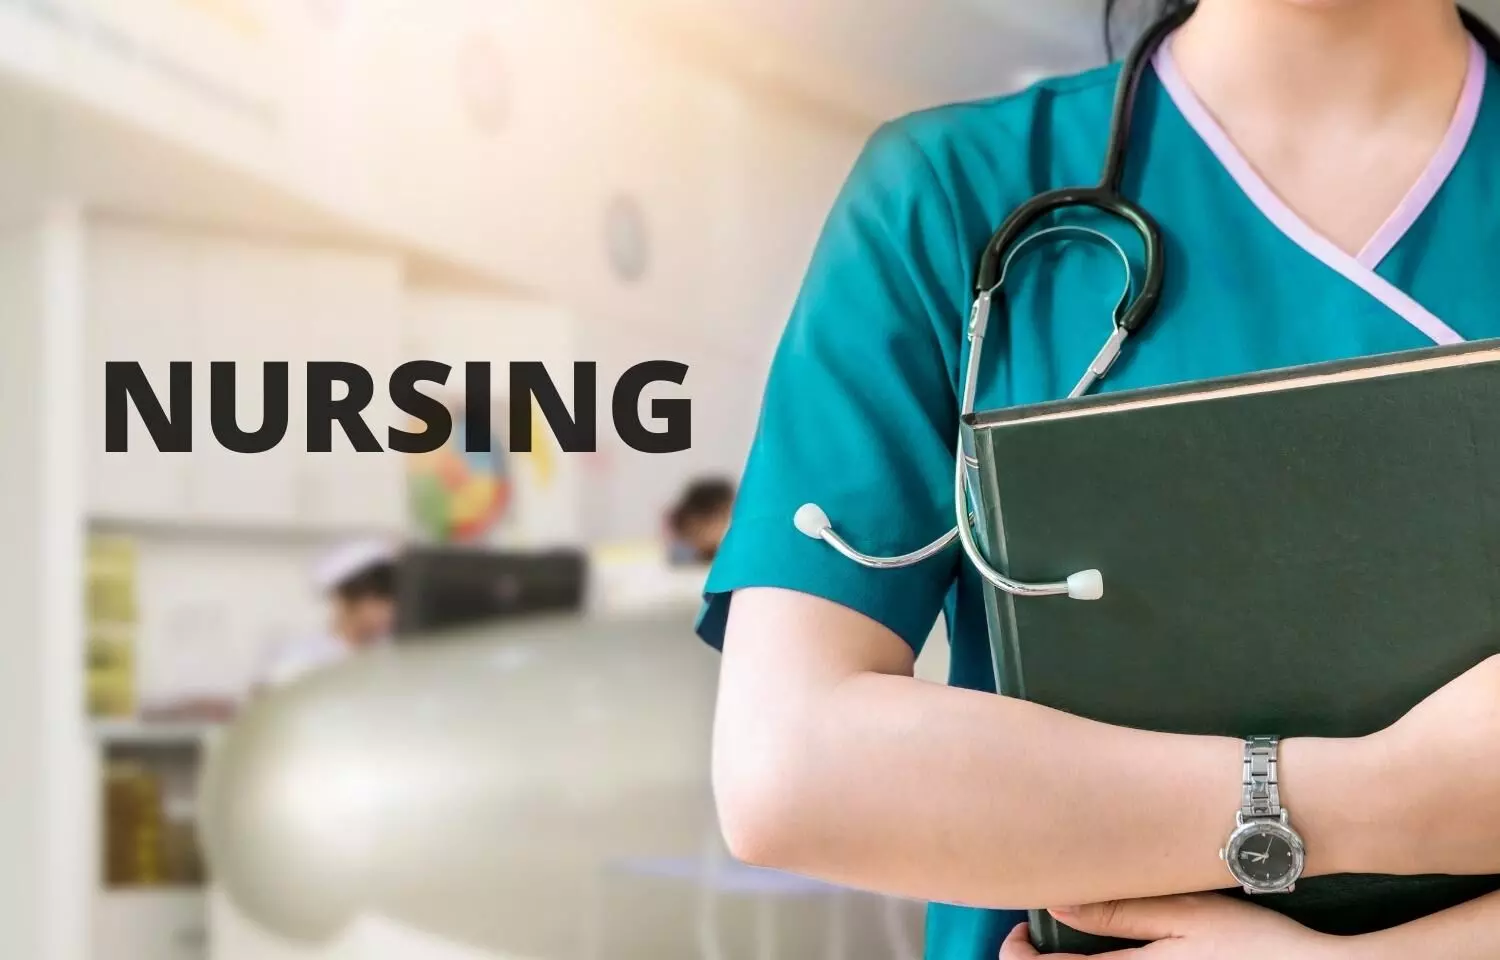 BSc Nursing Admissions: KNRUHS issues notice on web options for mop up counselling, Details